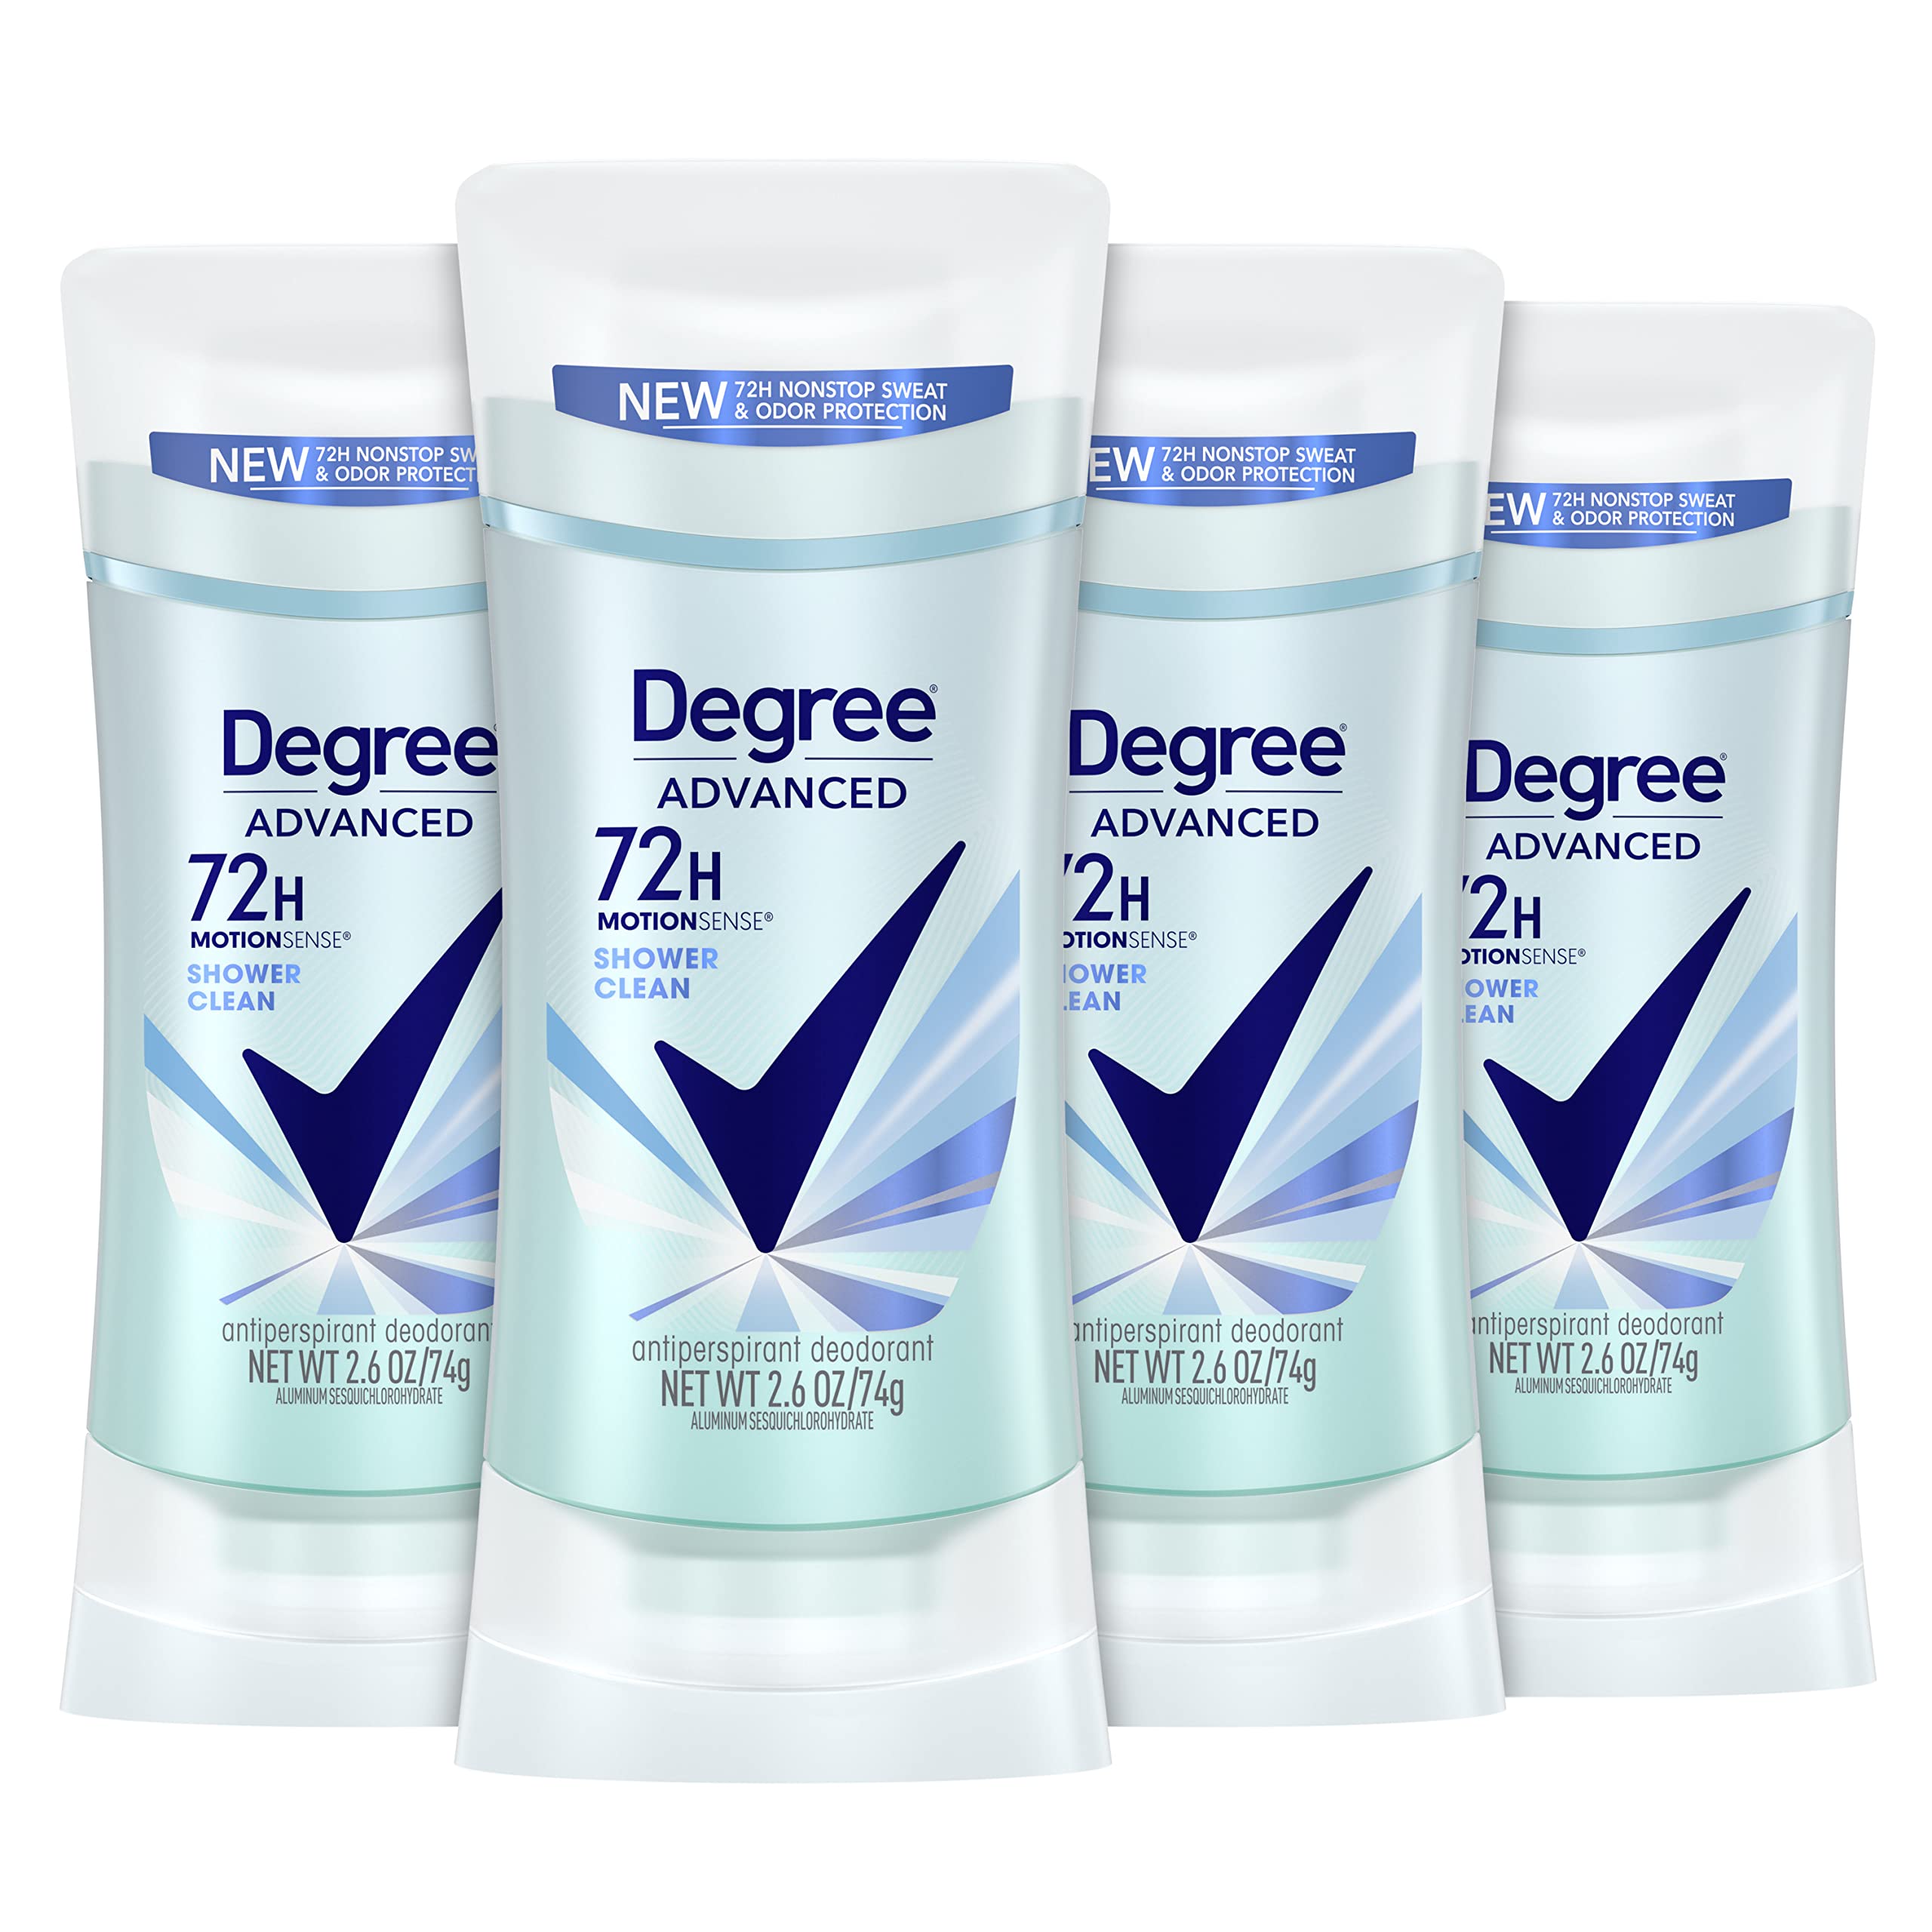 Degree Advanced Antiperspirant Deodorant 72-Hour Sweat & Odor Protection Shower Clean Antiperspirant for Women with MotionSense Technology 2.6 oz, Pack of 4